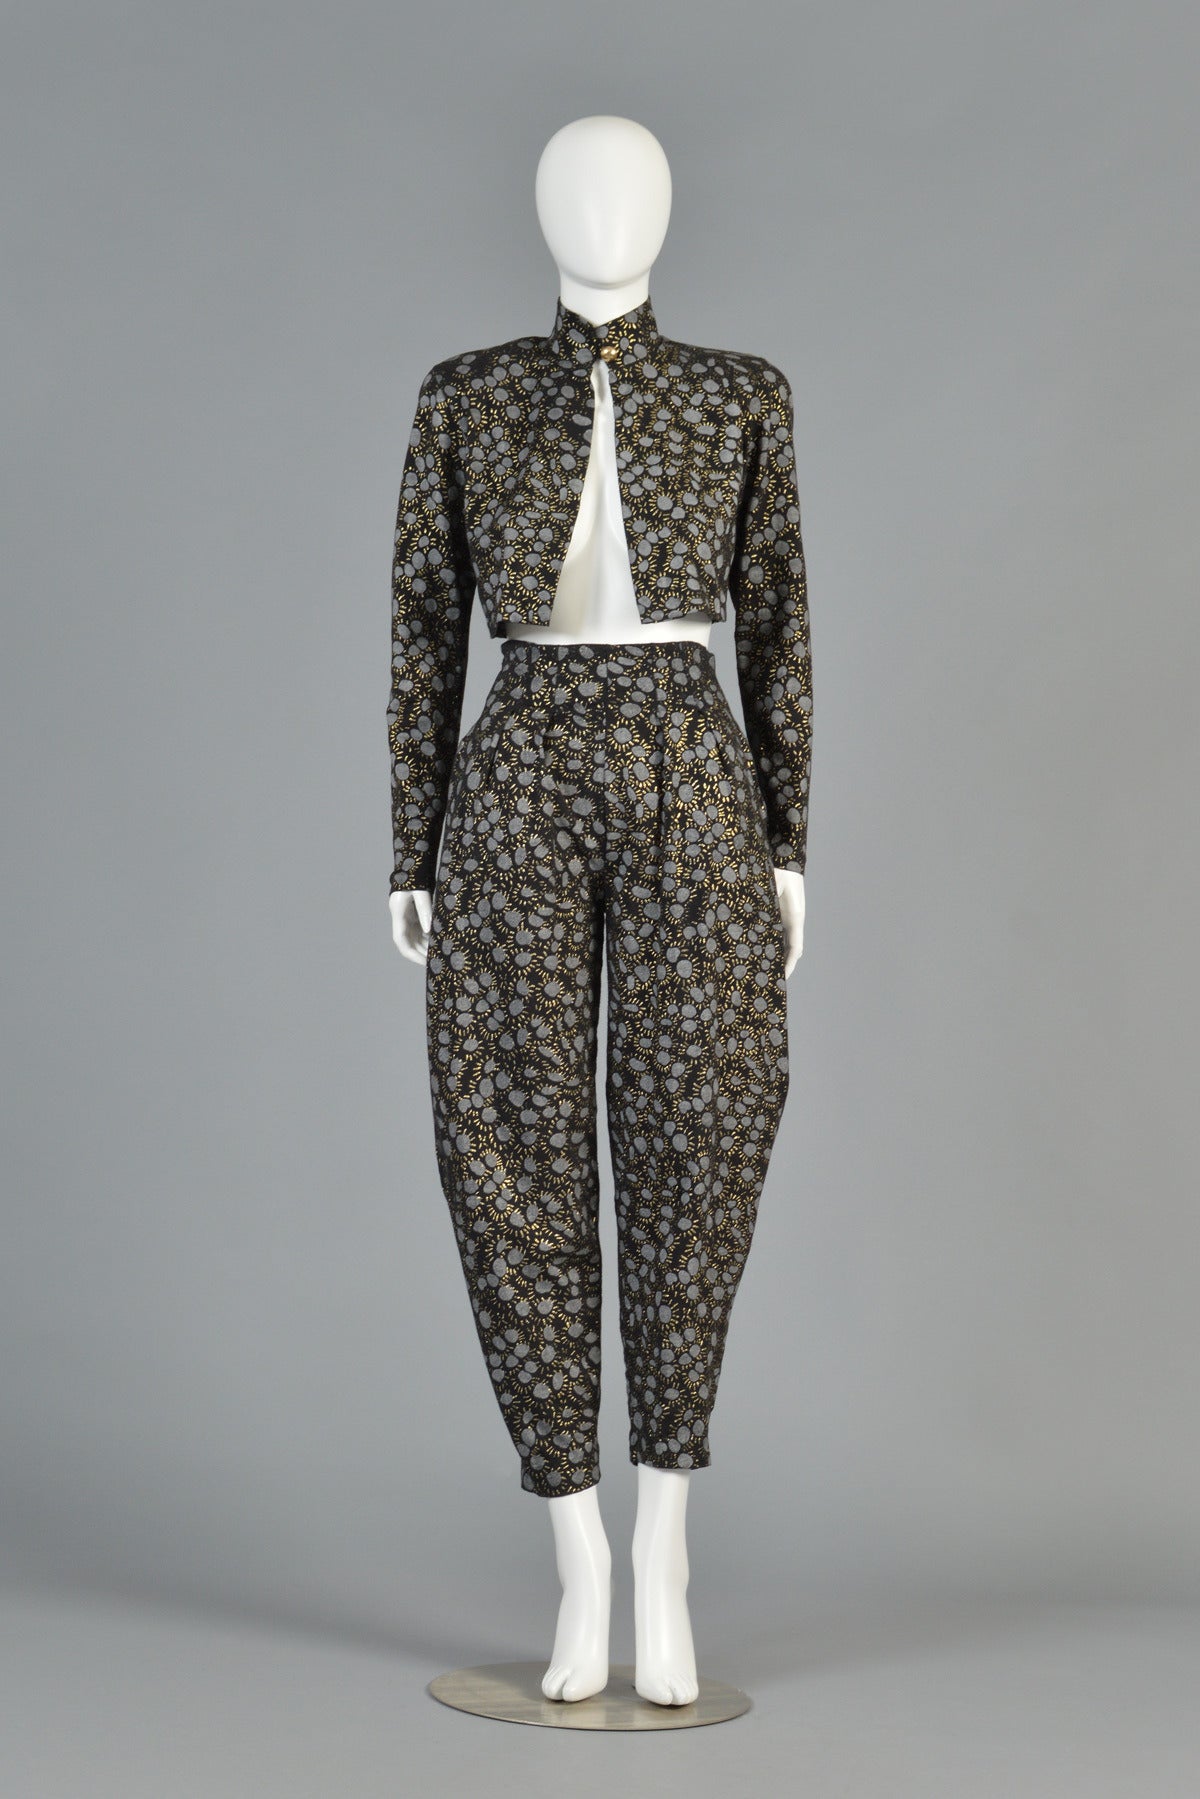 KILLER 1980s vintage Betsey Johnson 2-piece jacket and pant ensemble. Ultra hard to find + collectible Punk Label. The set consists of cropped long sleeve jacket with single gold button closure and high elastic-waist draped pants with besom pockets